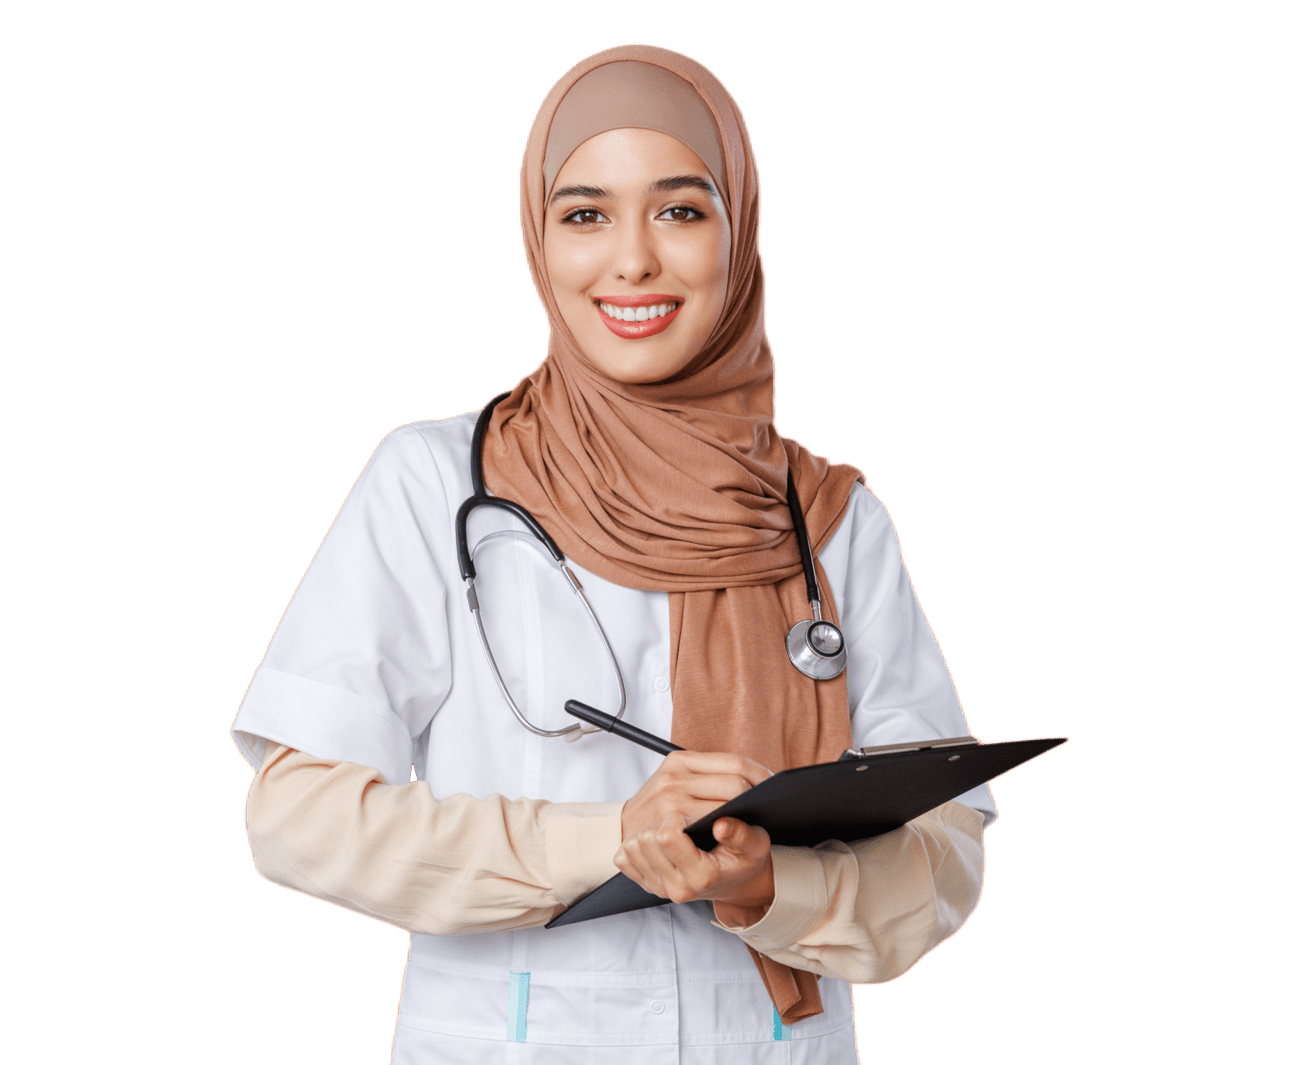 phd for medical doctors canada